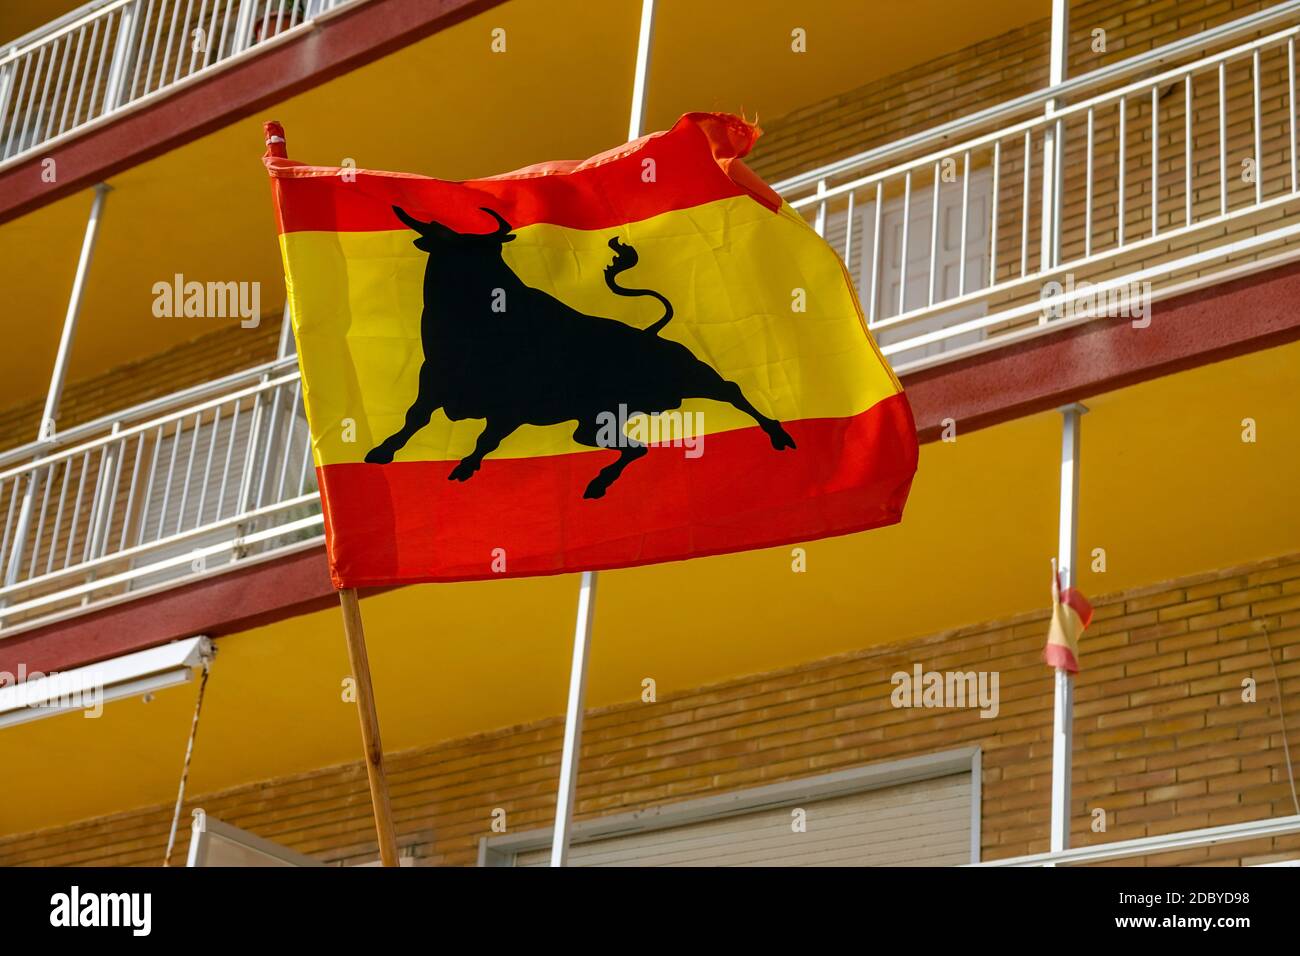 Black bull on red and yellow Spanish flag at La Mata, Torrevieja, Costa Blanca, Alicante, Spain Stock Photo